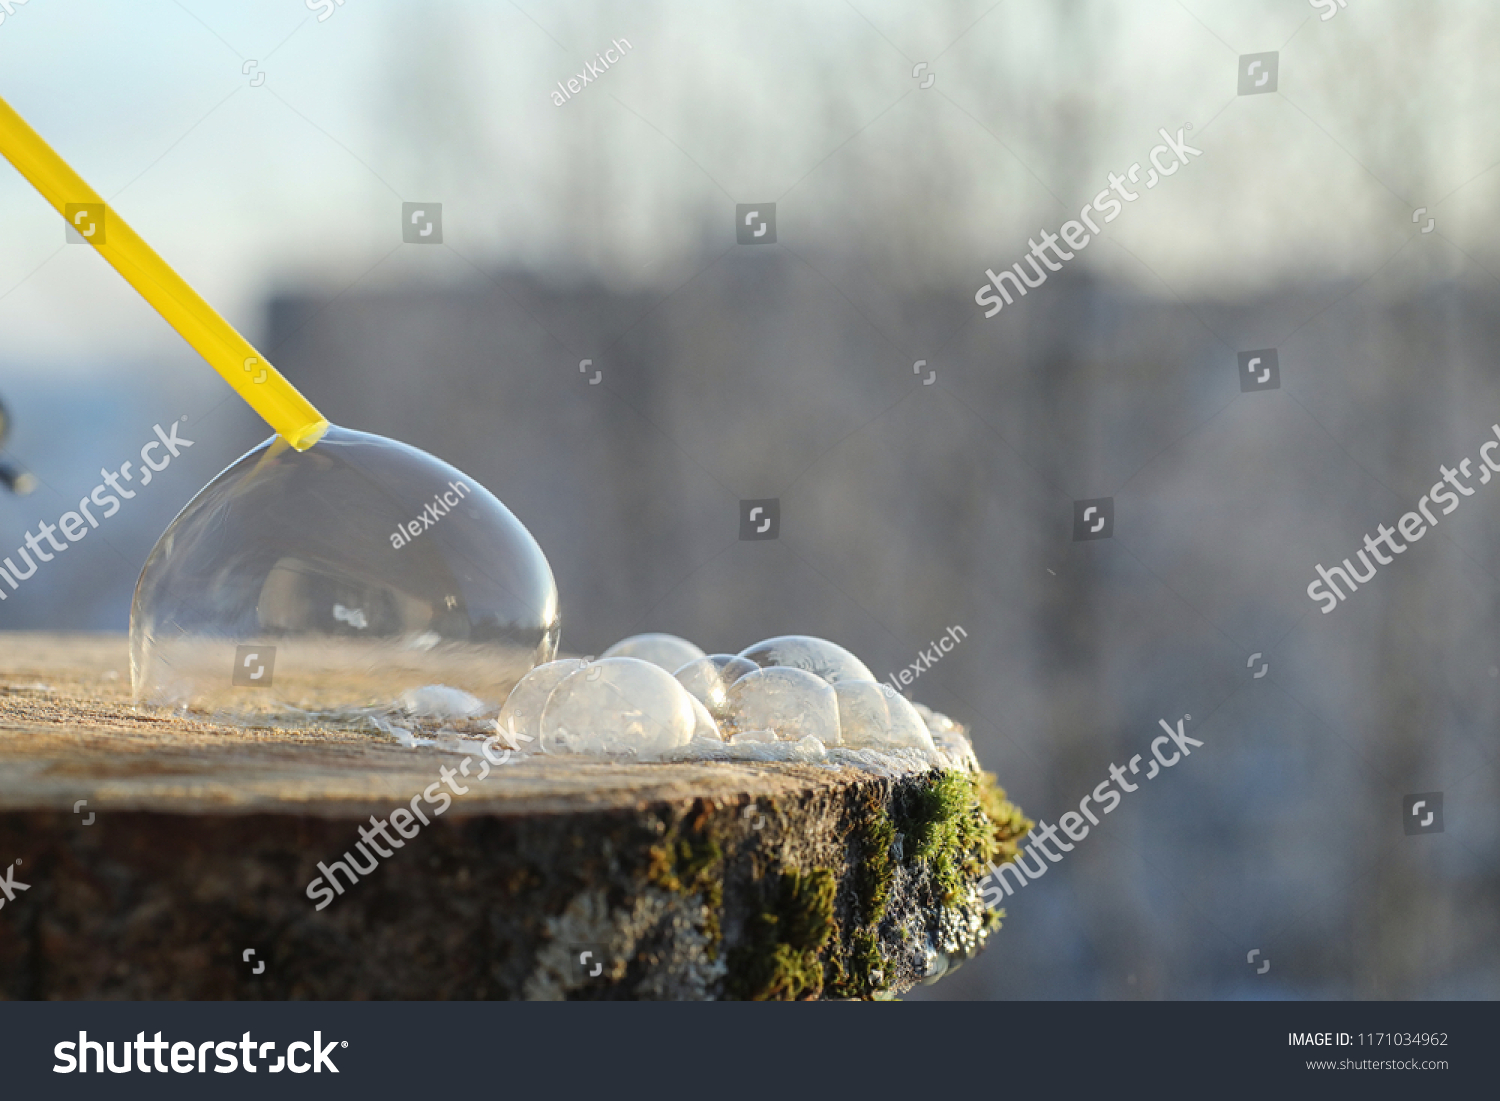 Soap bubbles freeze in the cold. Winter soapy water freezes in air.
 #1171034962